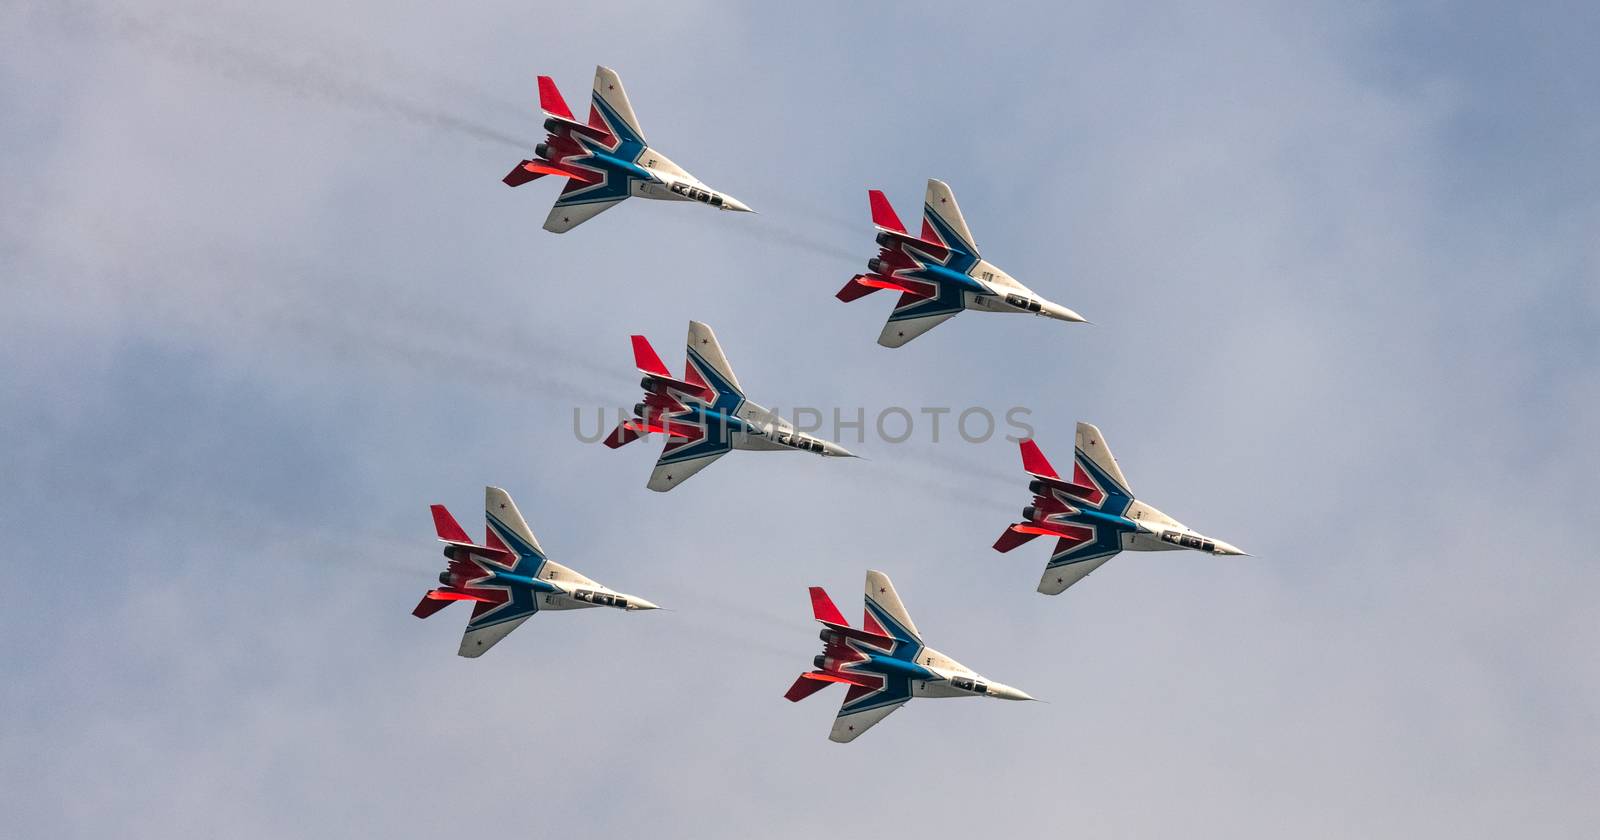 Barnaul, Russia - September 19, 2020: A shot of Strizhi MiG-29 fighter jet squadron performing stunts during an aeroshow. Blue cloudy sky as a background.